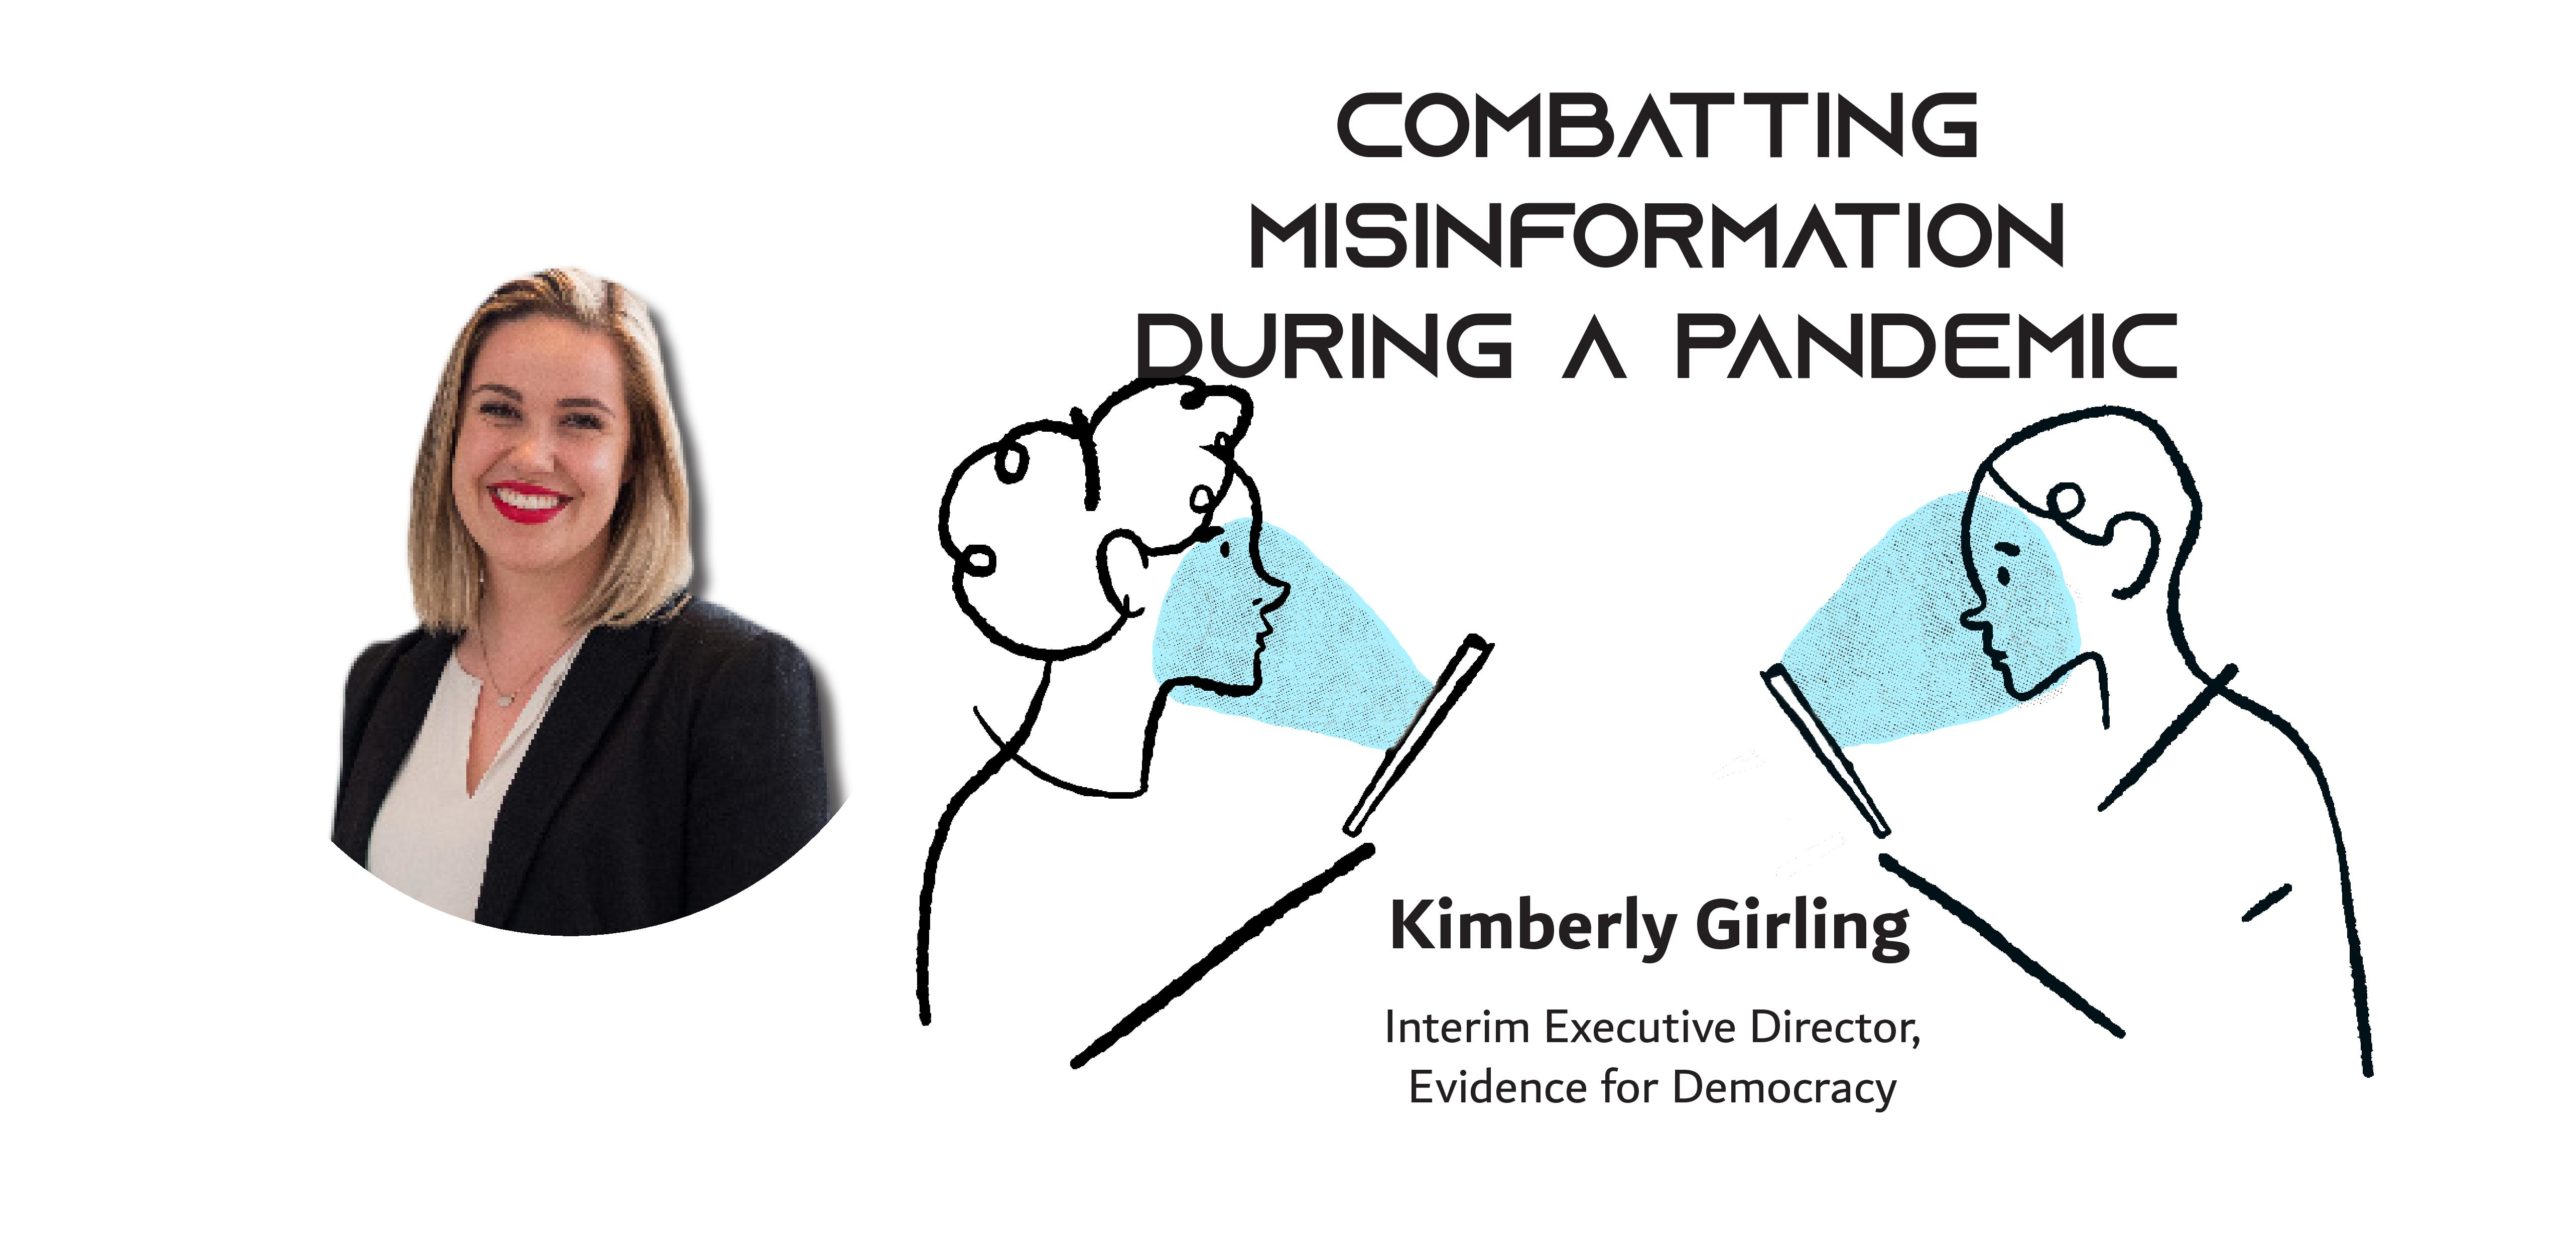 A picture of a woman next to a cartoon of two people looking at their phones wiht the text: Combatting Misinformation During a Pandemic Kimberly Girling Interim Executive Director, Evidence for Democracy